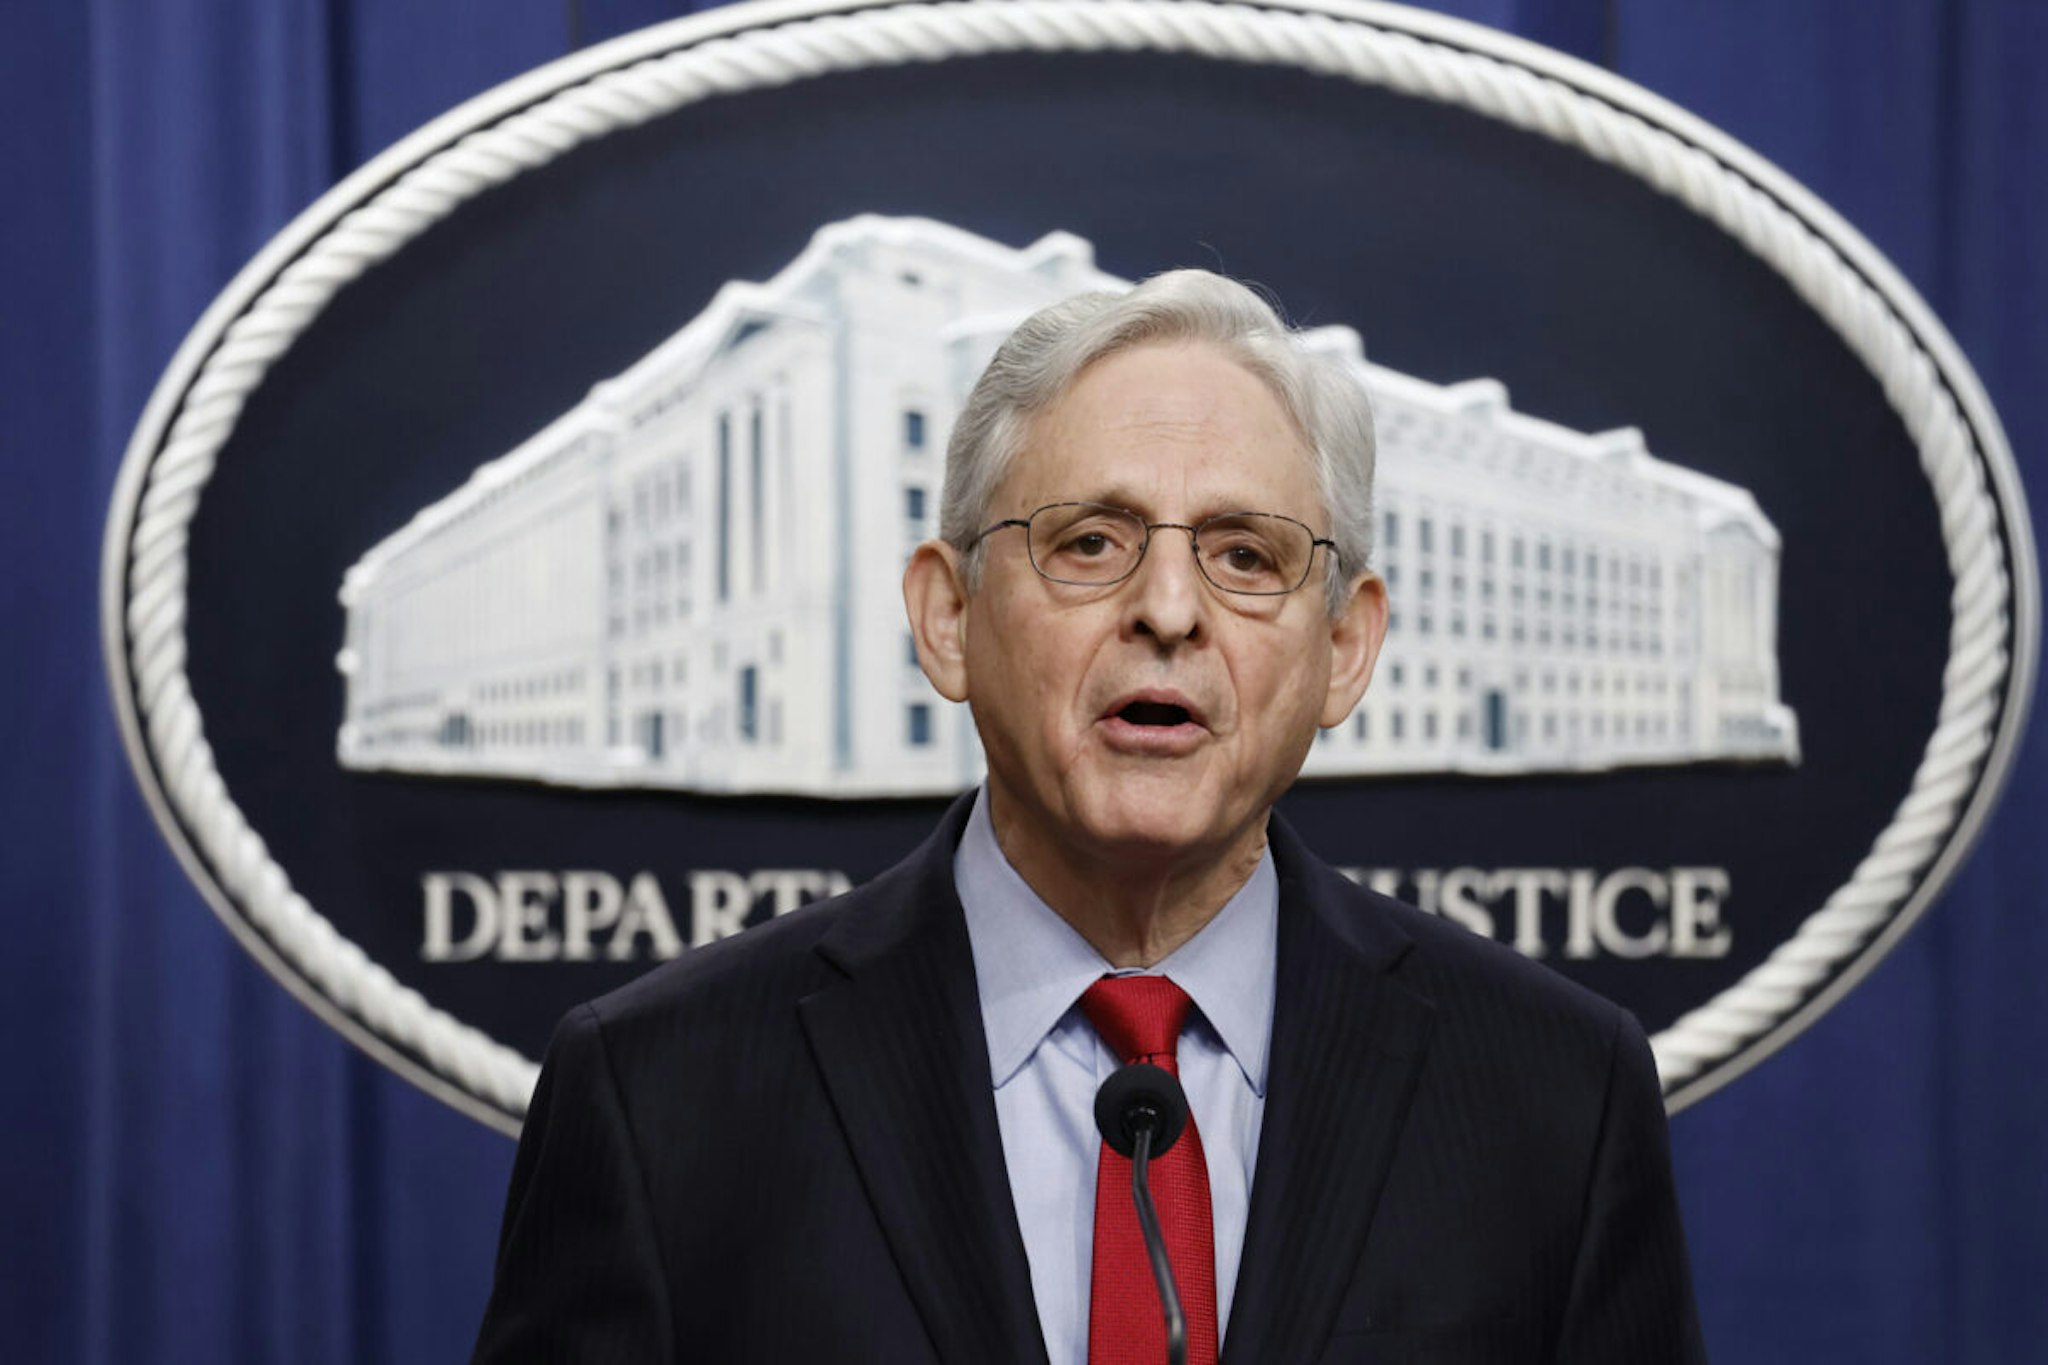 WASHINGTON, DC - MARCH 21: U.S. Attorney General Merrick Garland speaks during a news conference at the Department of Justice Building on March 21, 2024 in Washington, DC. During the news conference Garland and DOJ officials announced the department would be taking action against Apple, claiming that the tech company has an illegal monopoly on smartphones, violating antitrust laws.